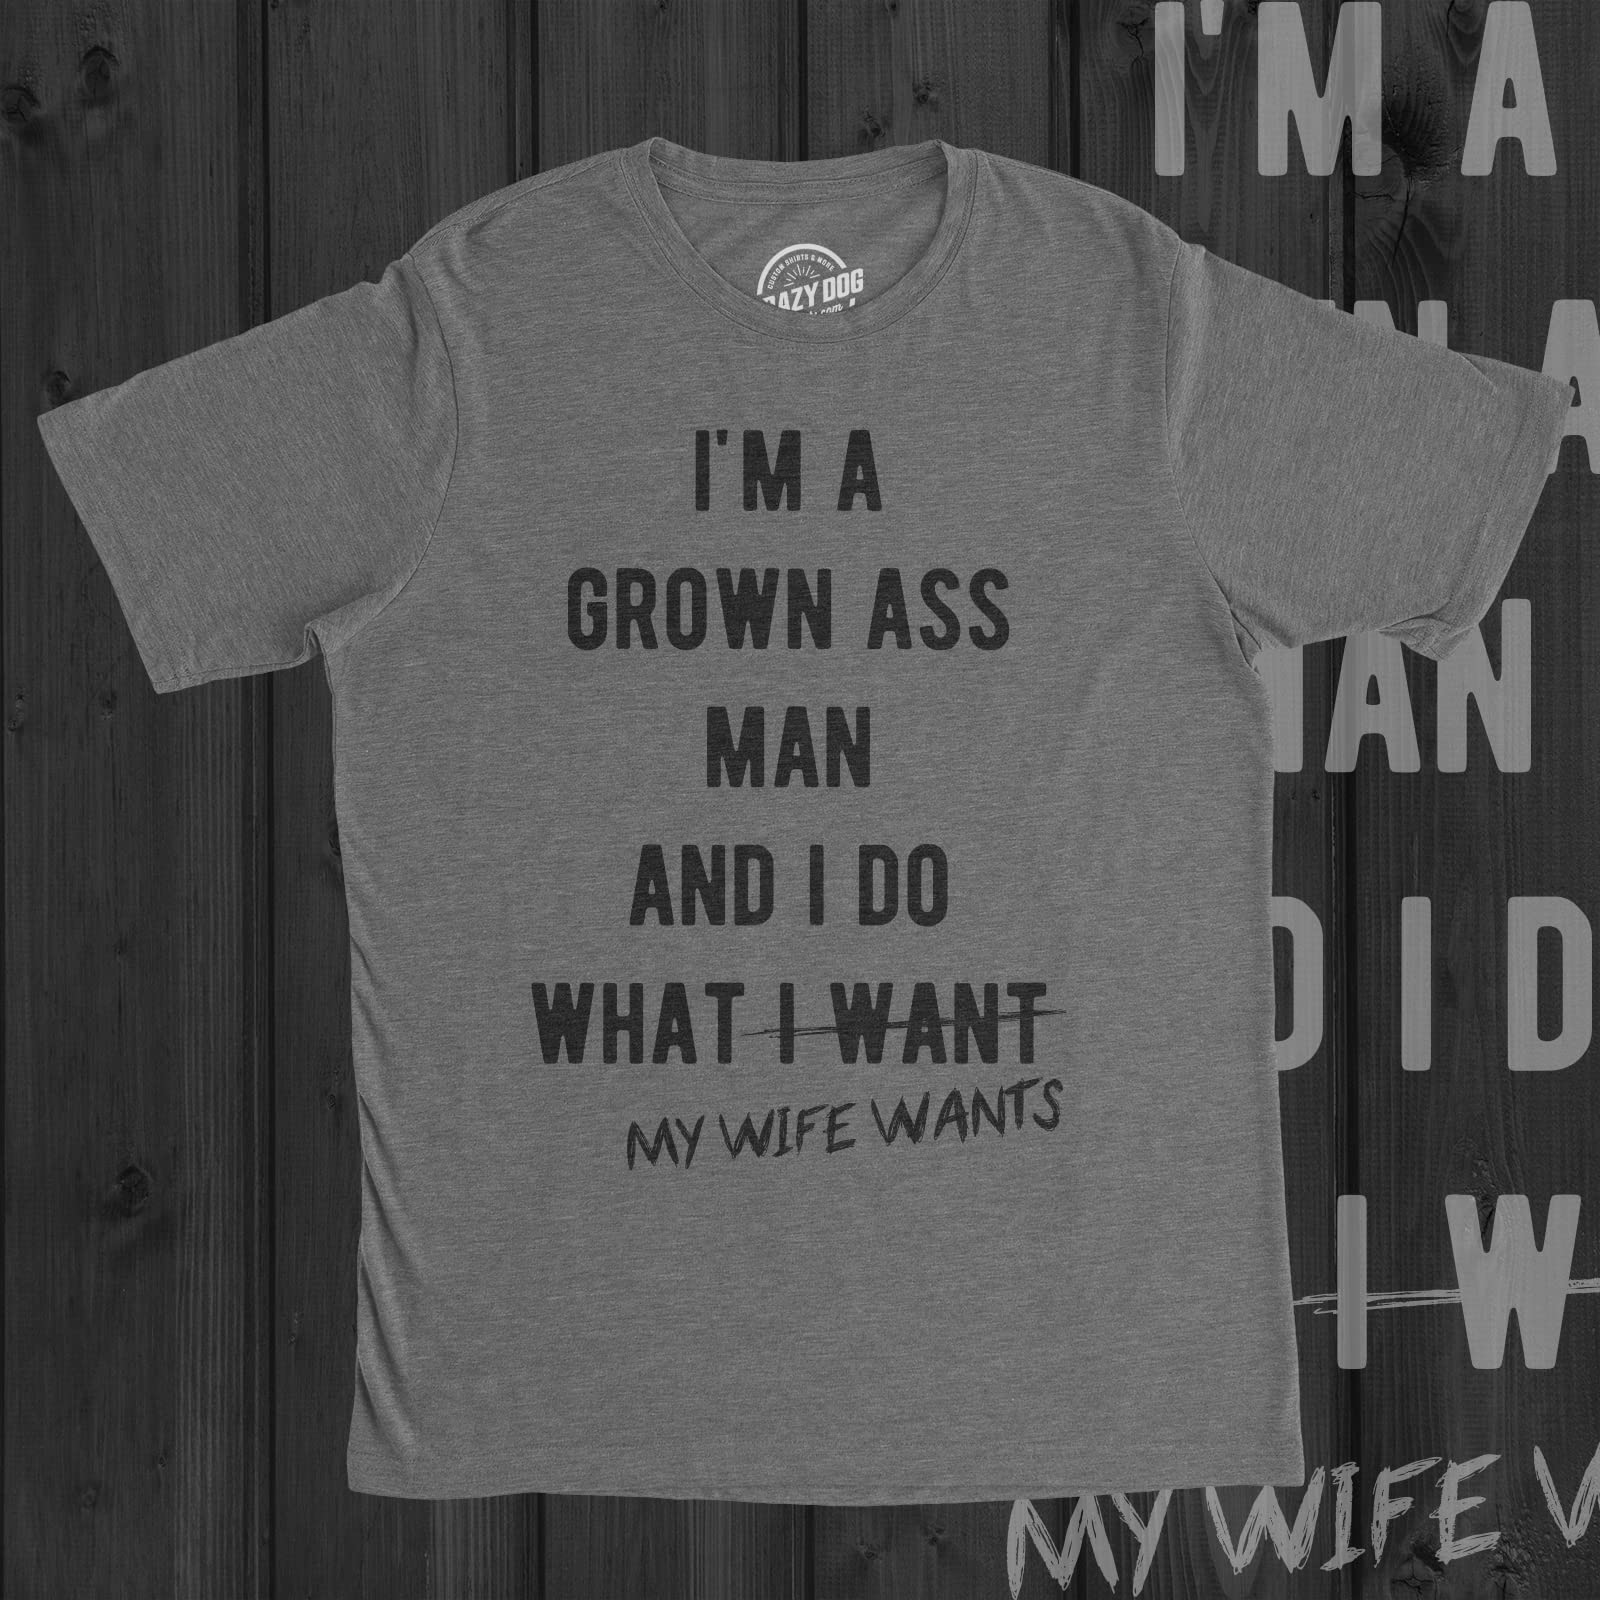 Crazy Dog T-Shirts Mens Im A Grown Man I Do What My Wife Wants T Shirt Funny Marriage Sarcastic Tee